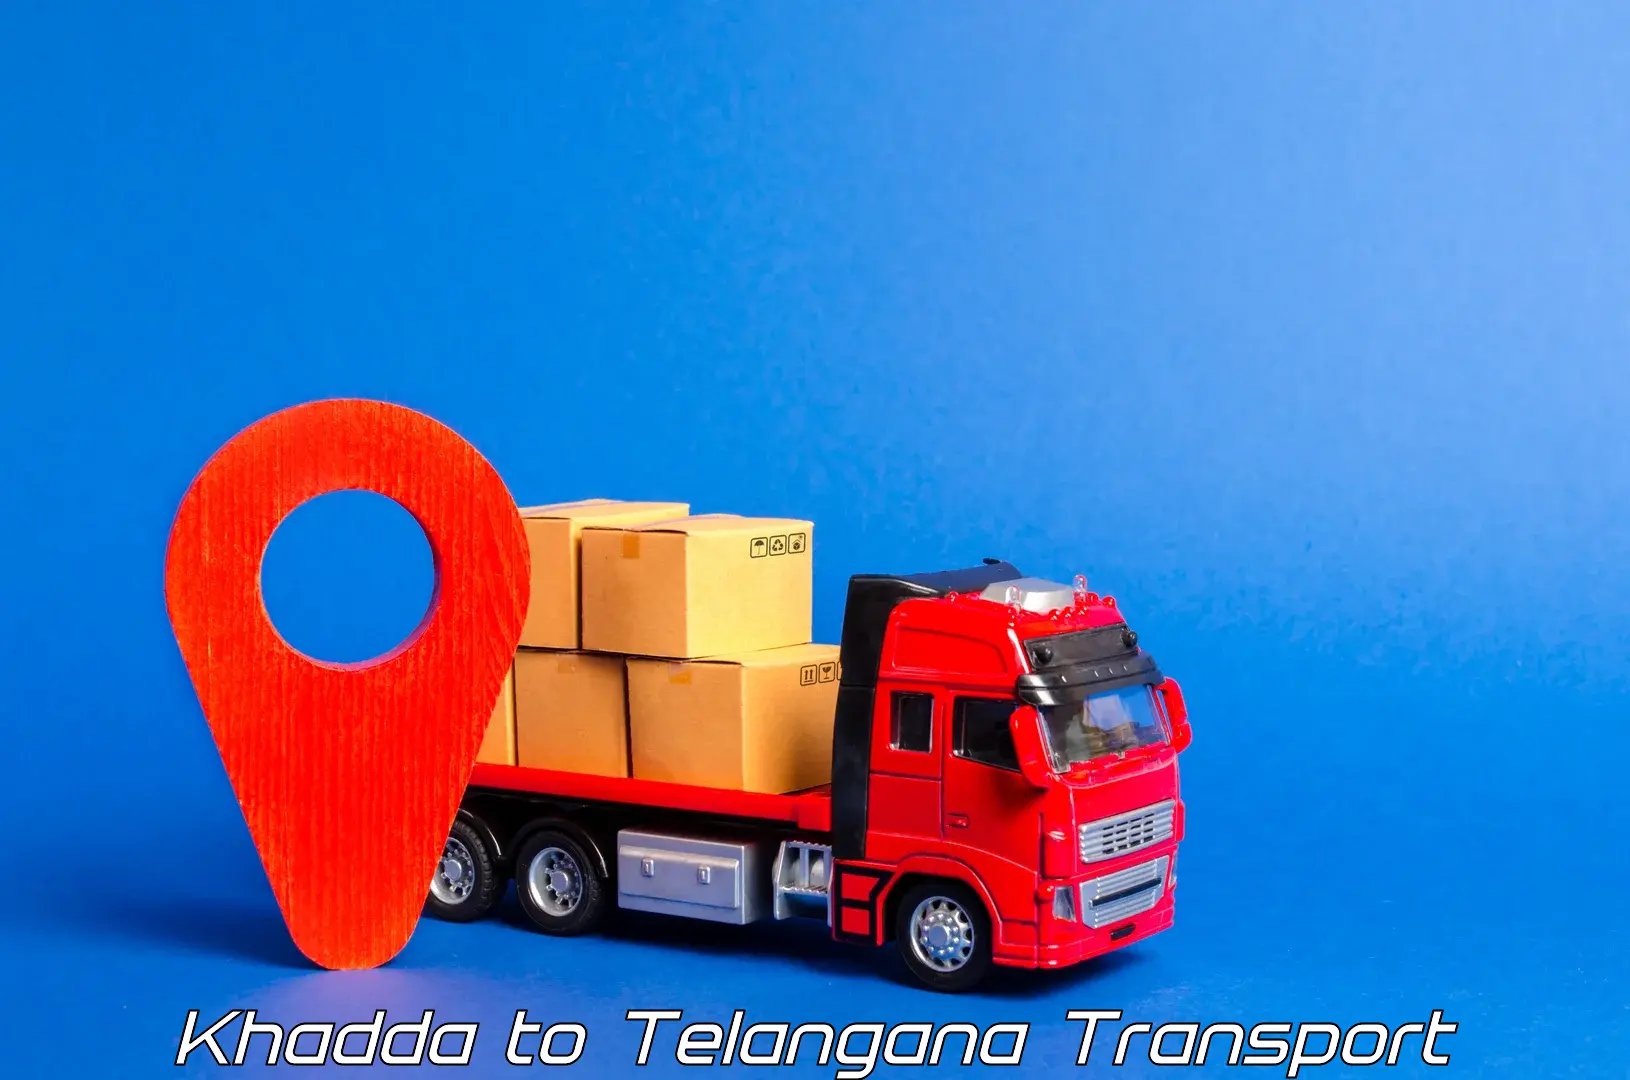 Best transport services in India Khadda to Gangadhara